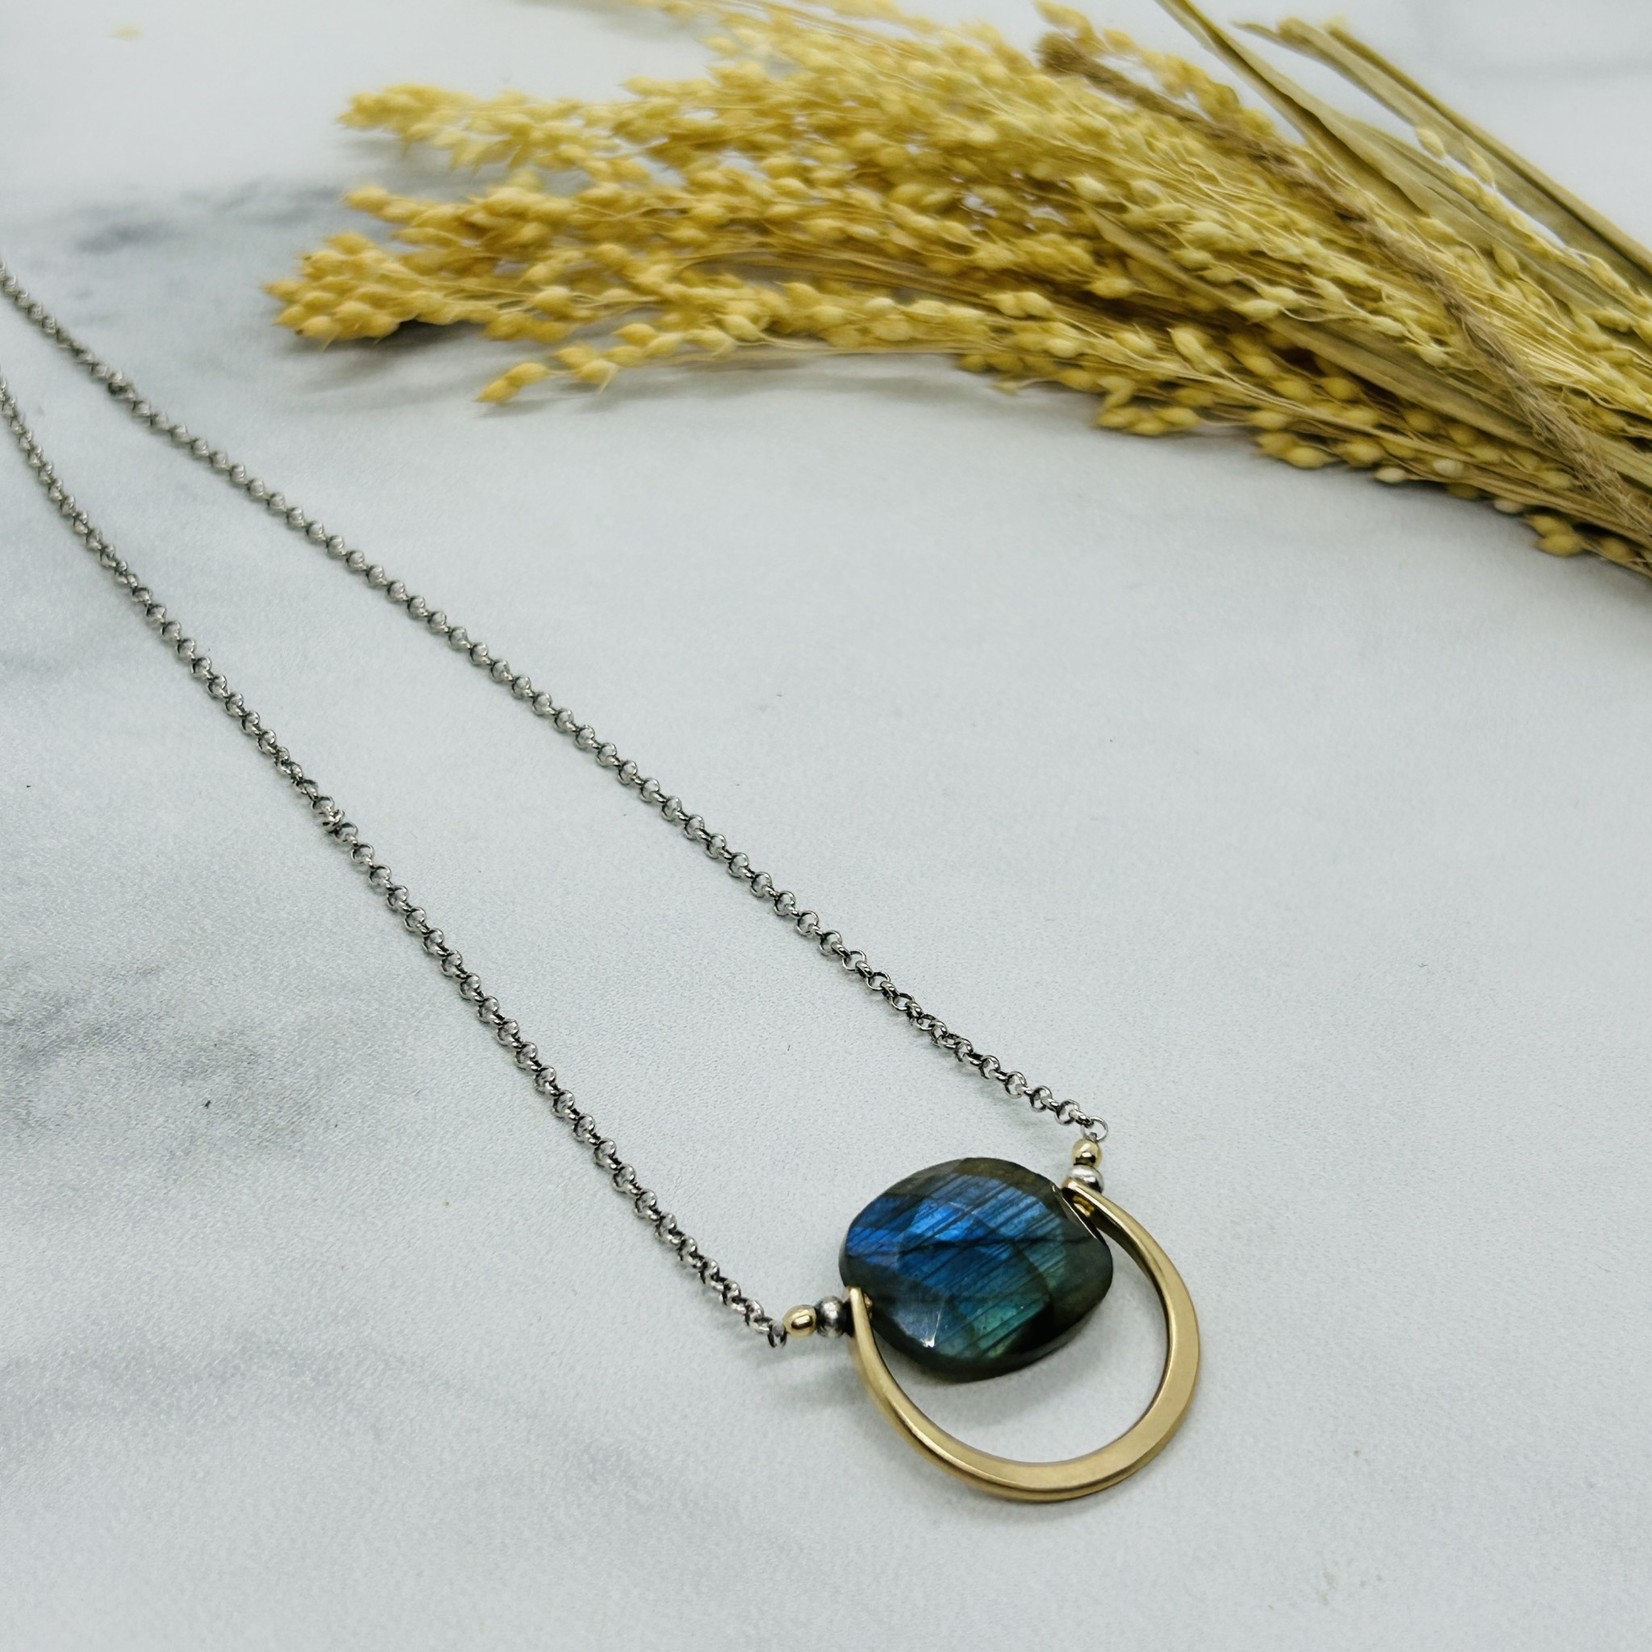 Handmade Faceted Labradorite Slab in 14kt semi circle on Oxdized Sterling 16" Chain Necklace